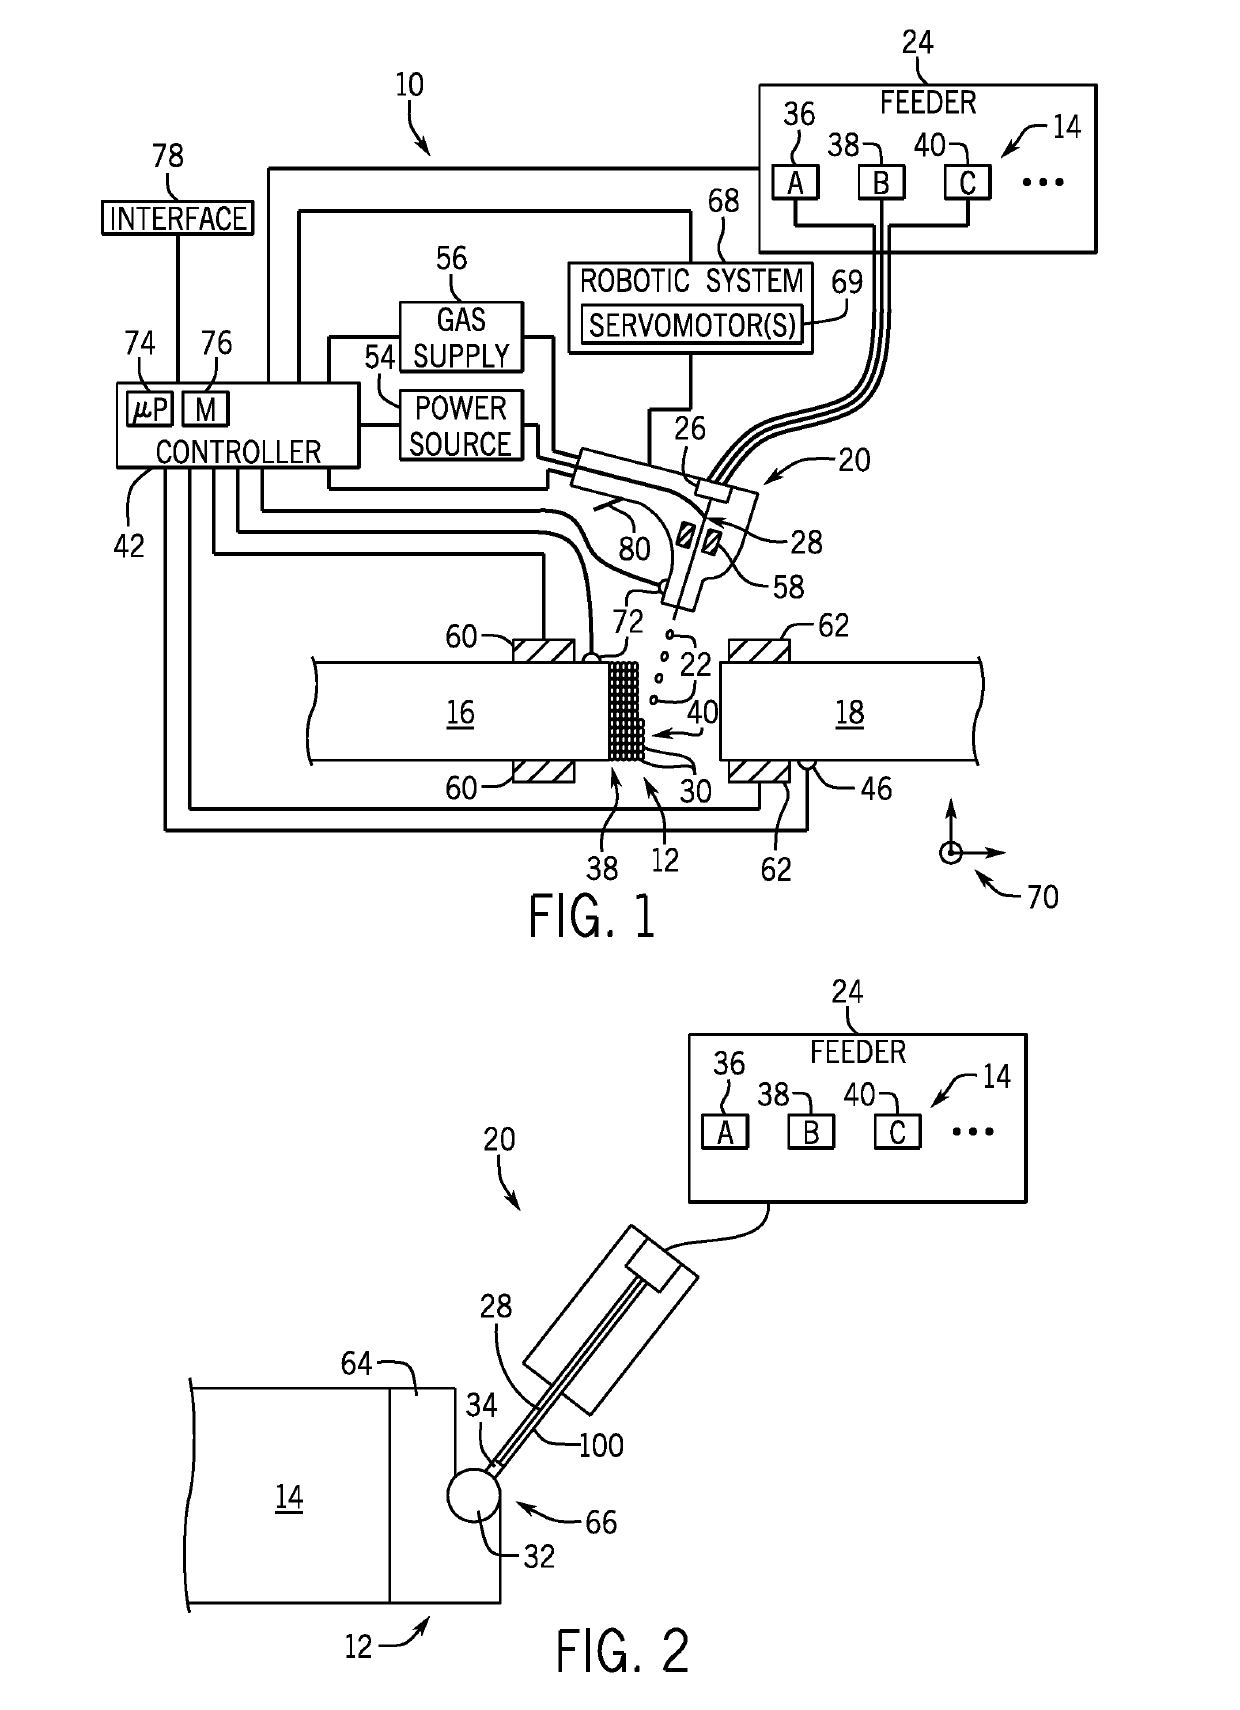 Metal manufacturing systems and methods using mechanical oscillation